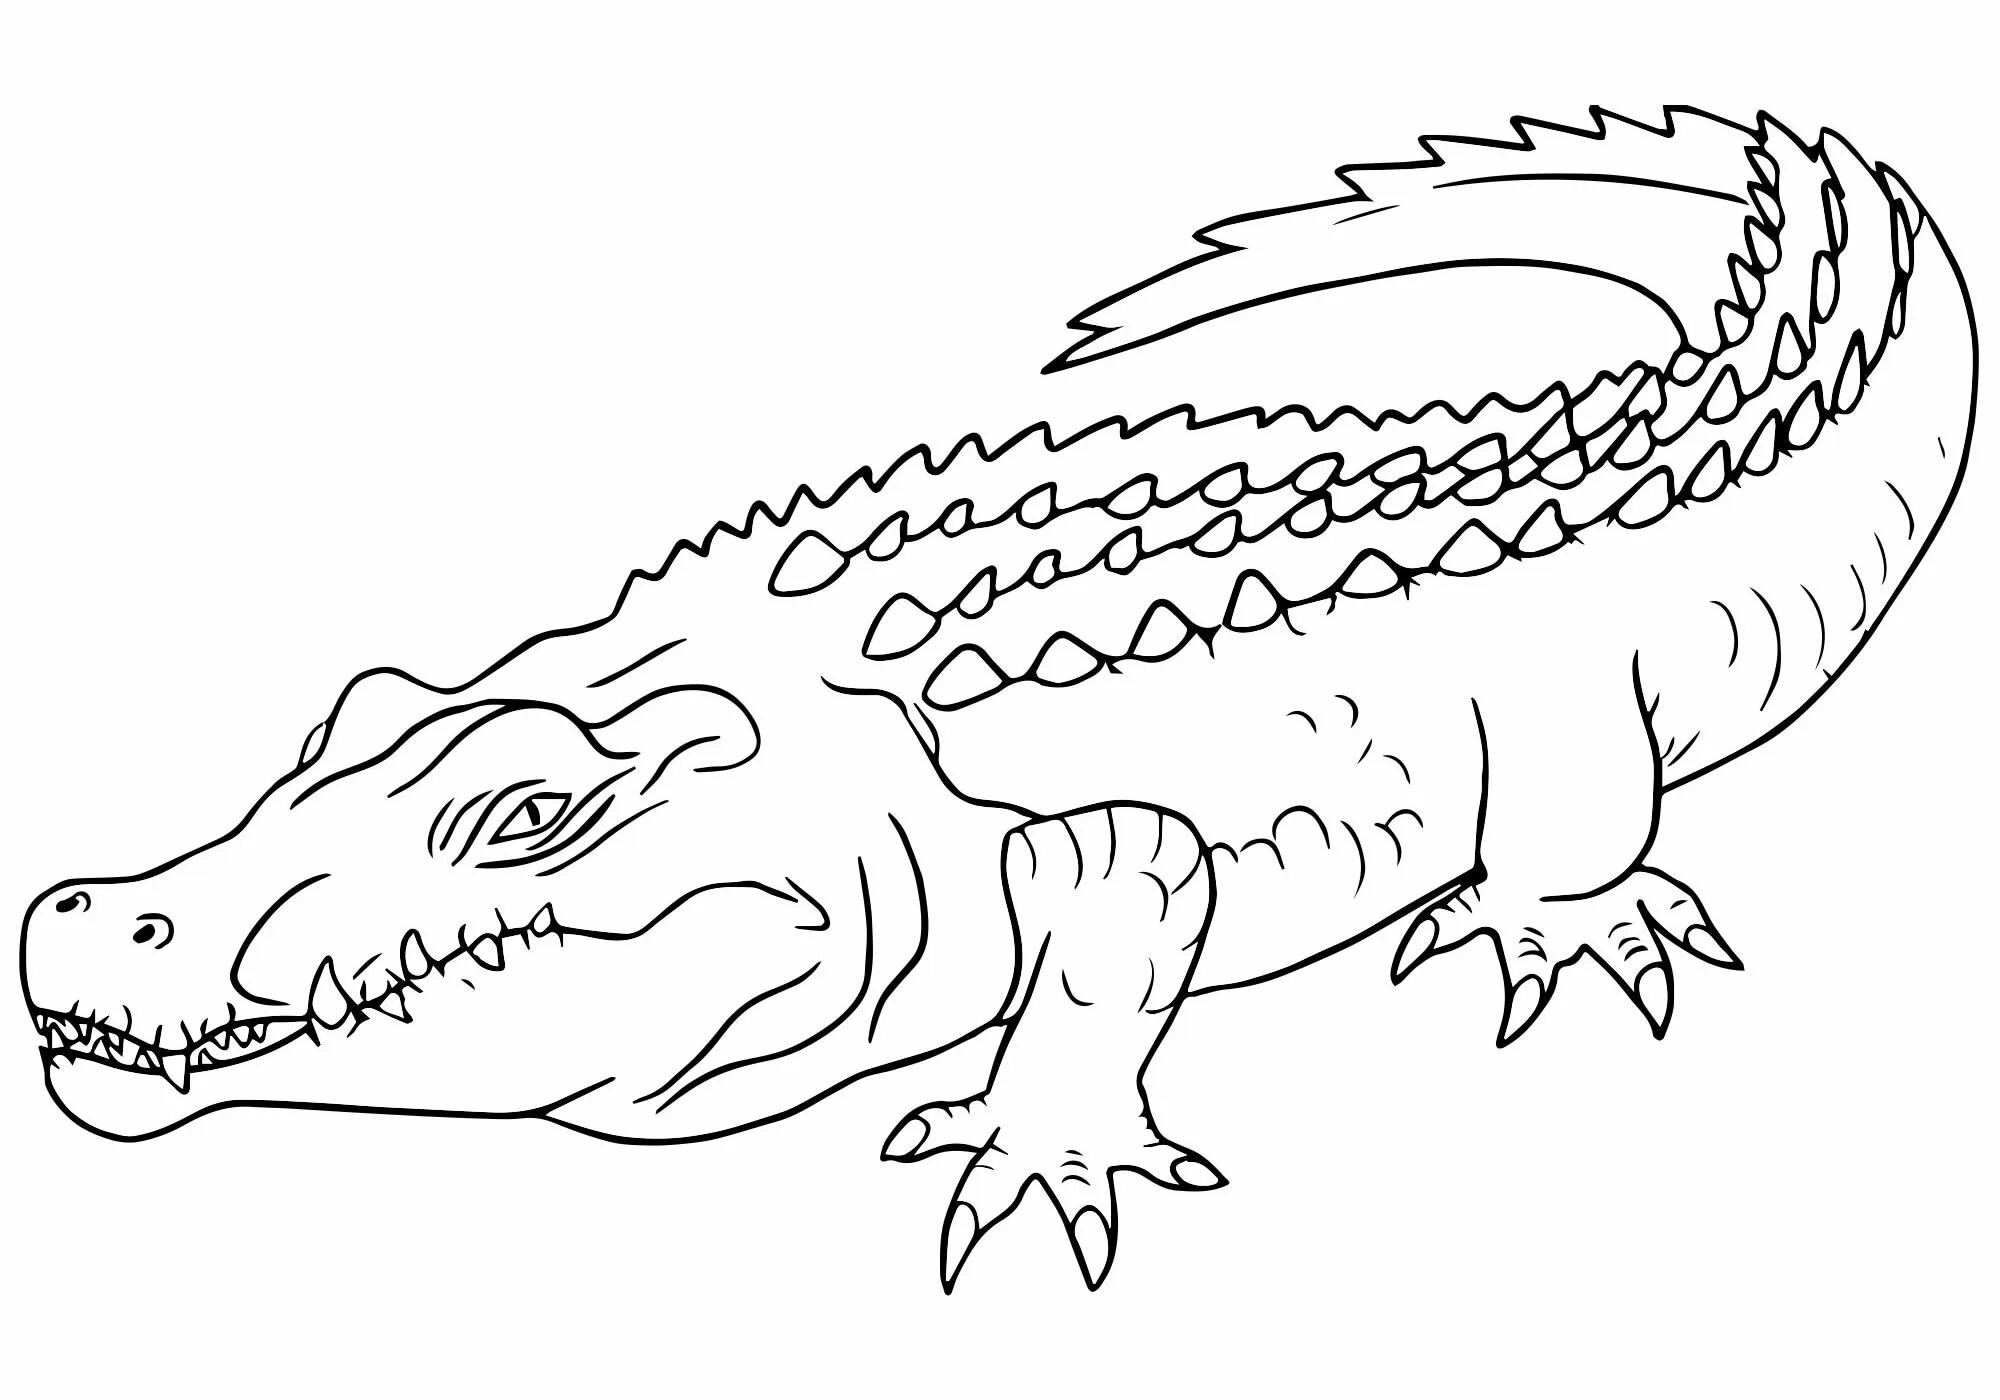 Coloring page exquisite scalloped crocodile